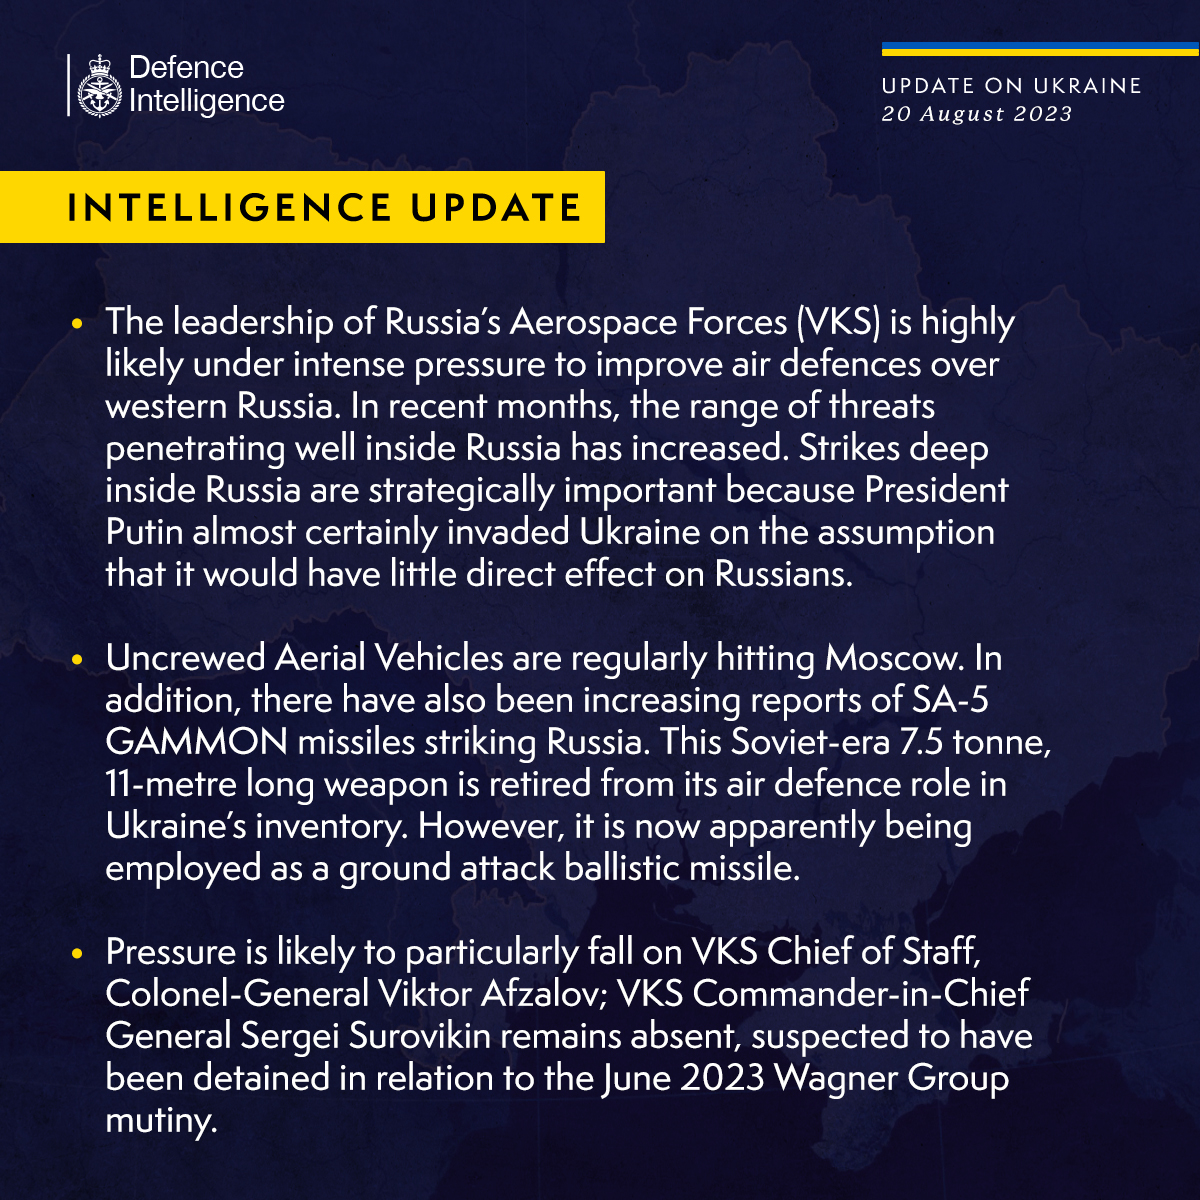 Latest Defence Intelligence update on the situation in Ukraine – 20 August 2023 Find out more about Defence Intelligence's use of language: ow.ly/C73350PB9I7 🇺🇦 #StandWithUkraine 🇺🇦